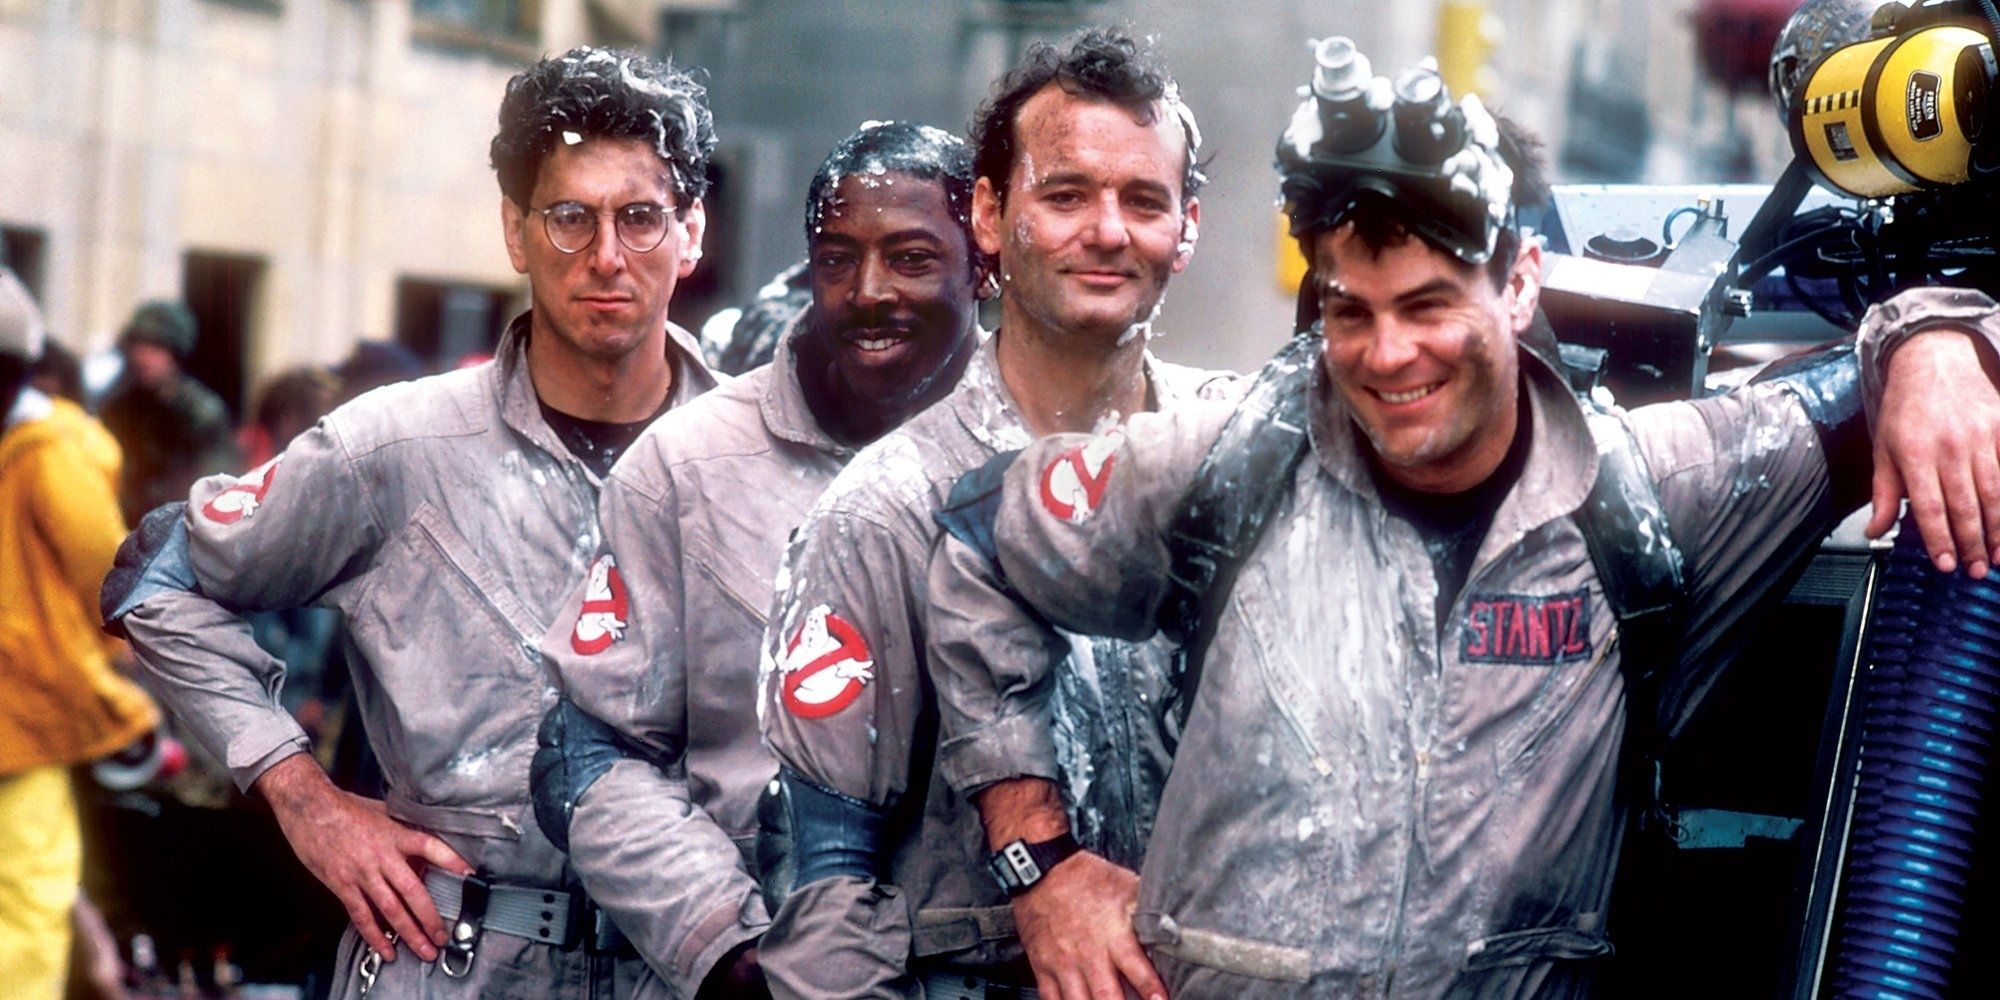 The Ghostbusters